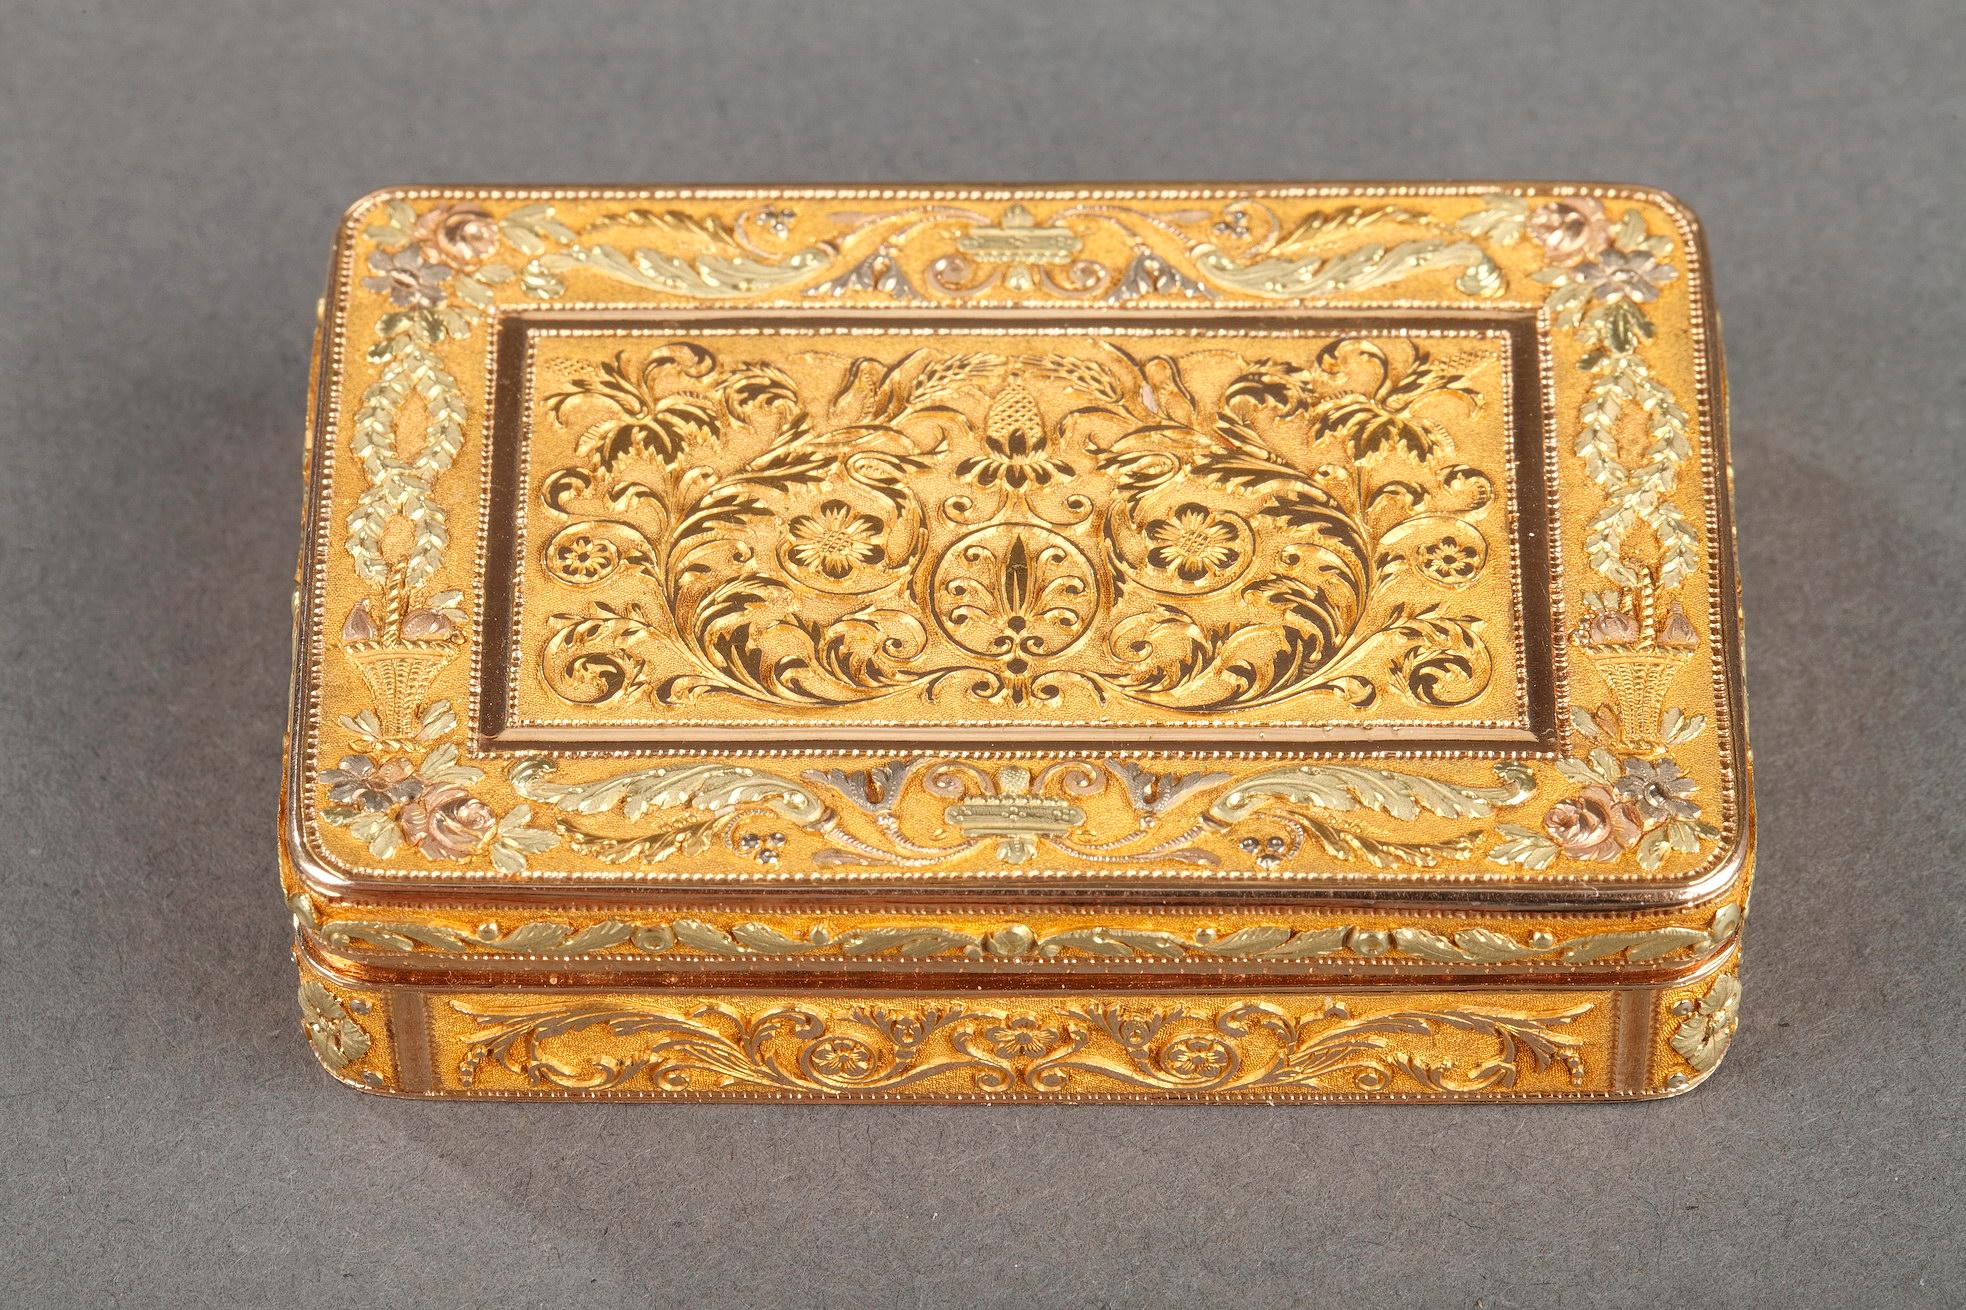 Exceptional rectangular box or snuff box in four-tone gold. The hinged lid in fine relief has an astonishing composition: the central panel in amati gold is decorated with symmetrical motifs of foliage and flowers. This panel is framed by a frieze